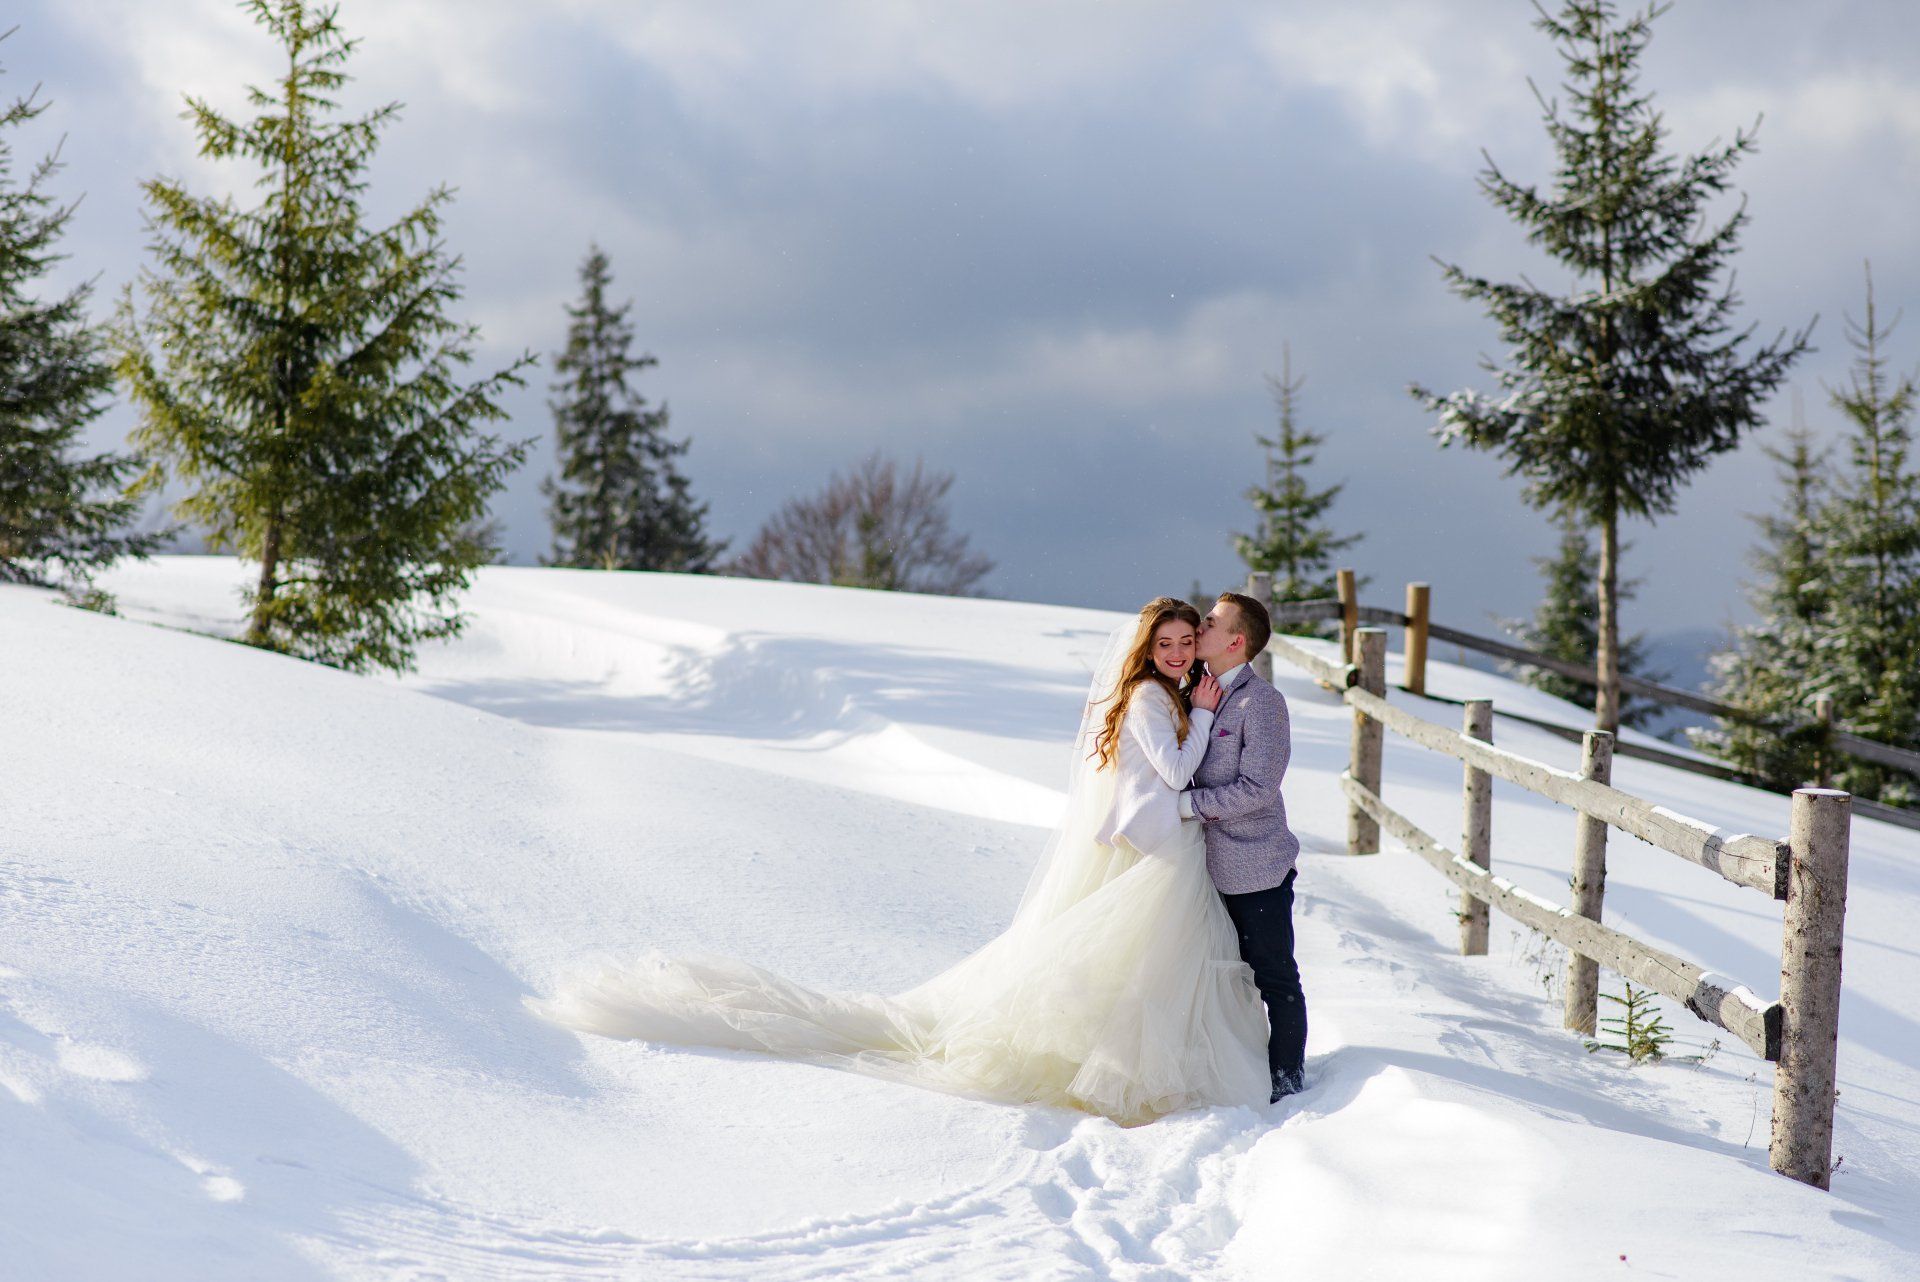 A groom kisses the bride against the backdrop of snow and trees